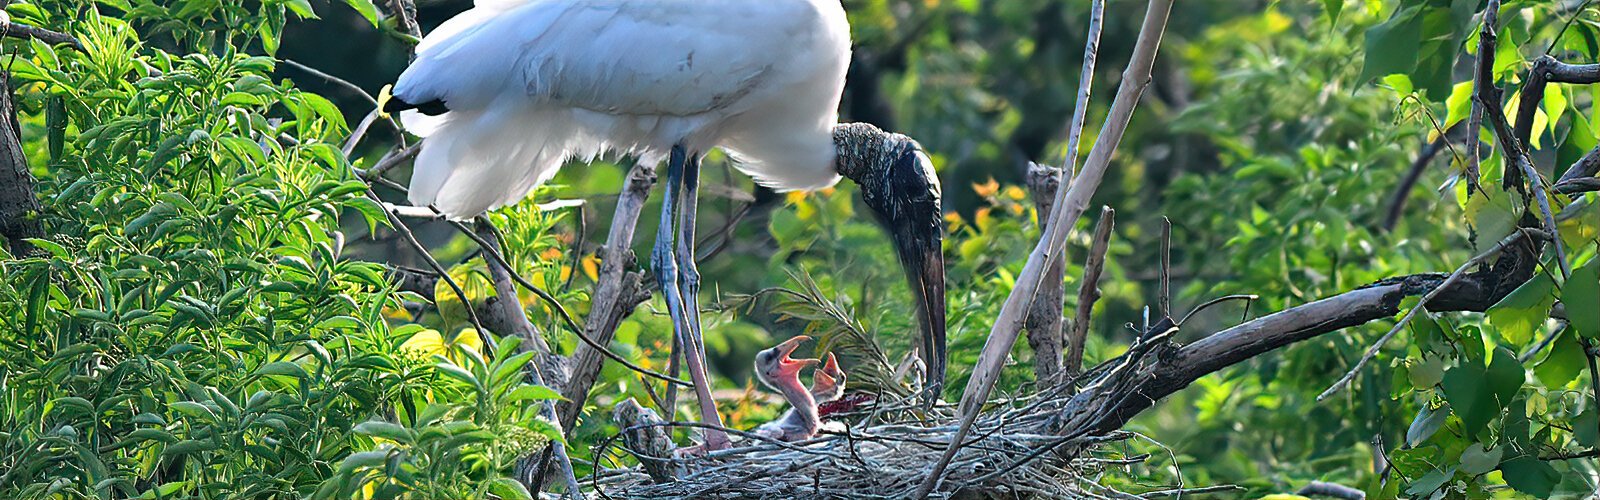 Another rookery nester, the wood stork tends to its tiny chicks that require an enormous amount of food to survive. This species feels for prey with their feet and bills, and is therefore very dependent on low waters.